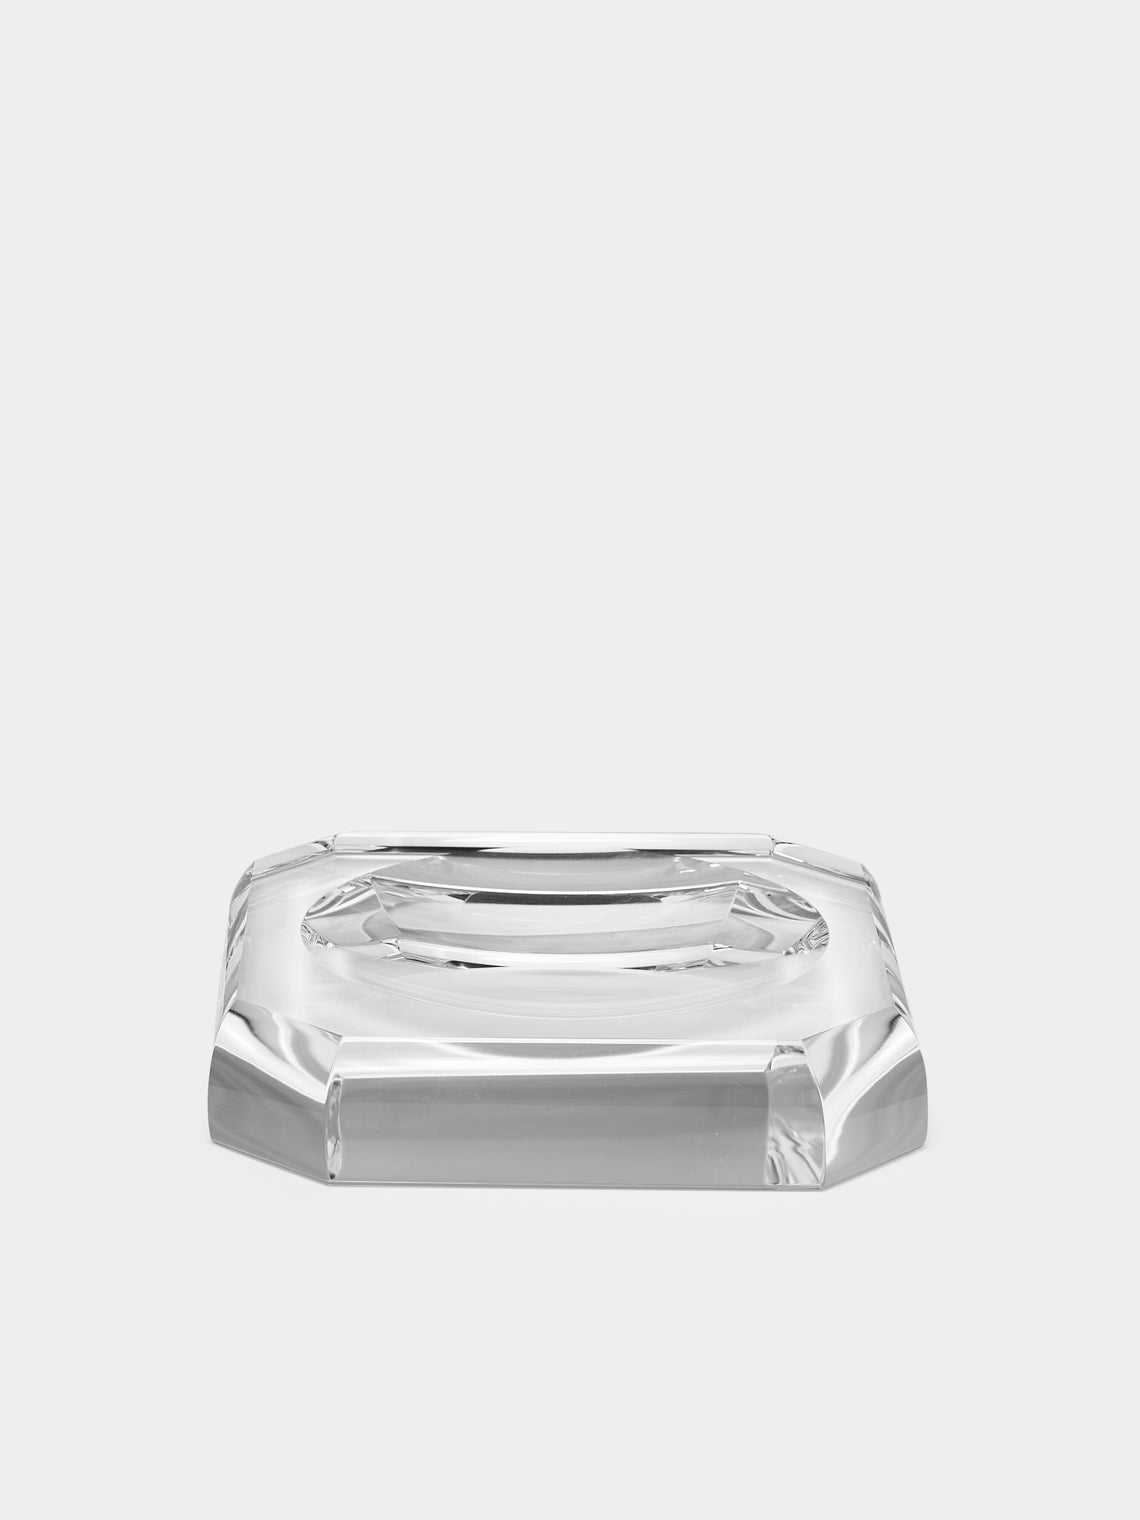 Décor Walther - Cut Crystal Soap Dish -  - ABASK - 